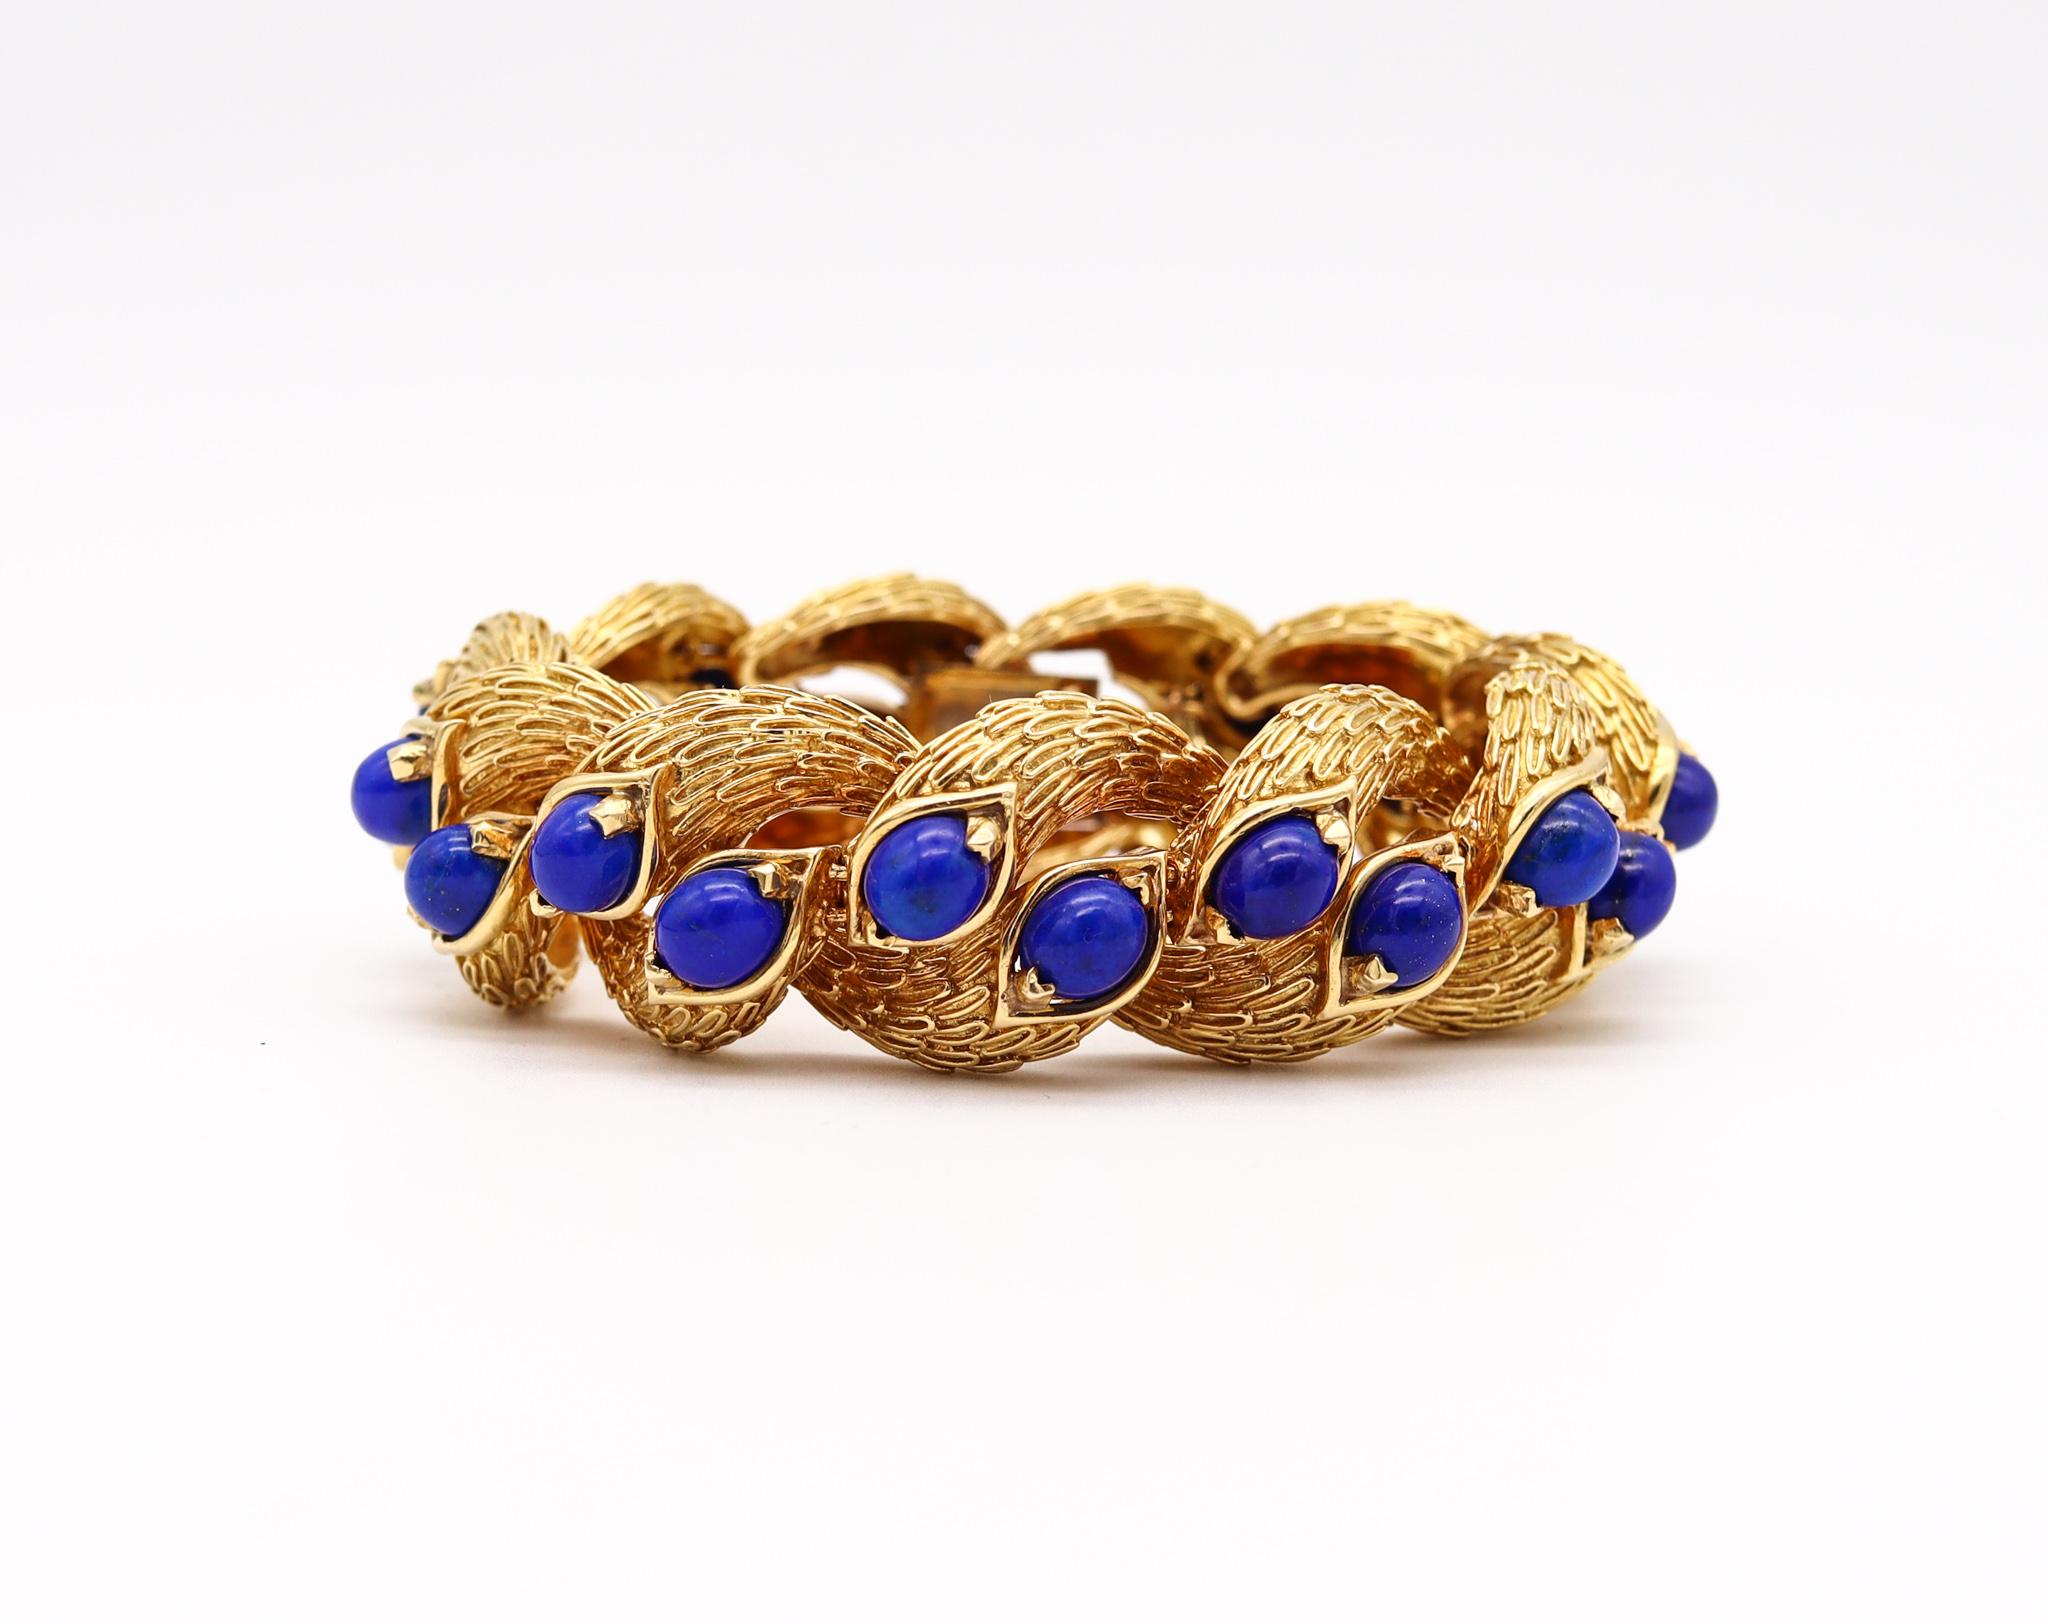 Byzantine bracelet designed by Carlo Weingrill.

Beautiful piece, created in Verona Italy at the jewelry atelier of Carlo Weingrill, back in the 1960. Crafted in the Byzantine way with textured patterns in solid yellow gold of 18 karats. Fitted with